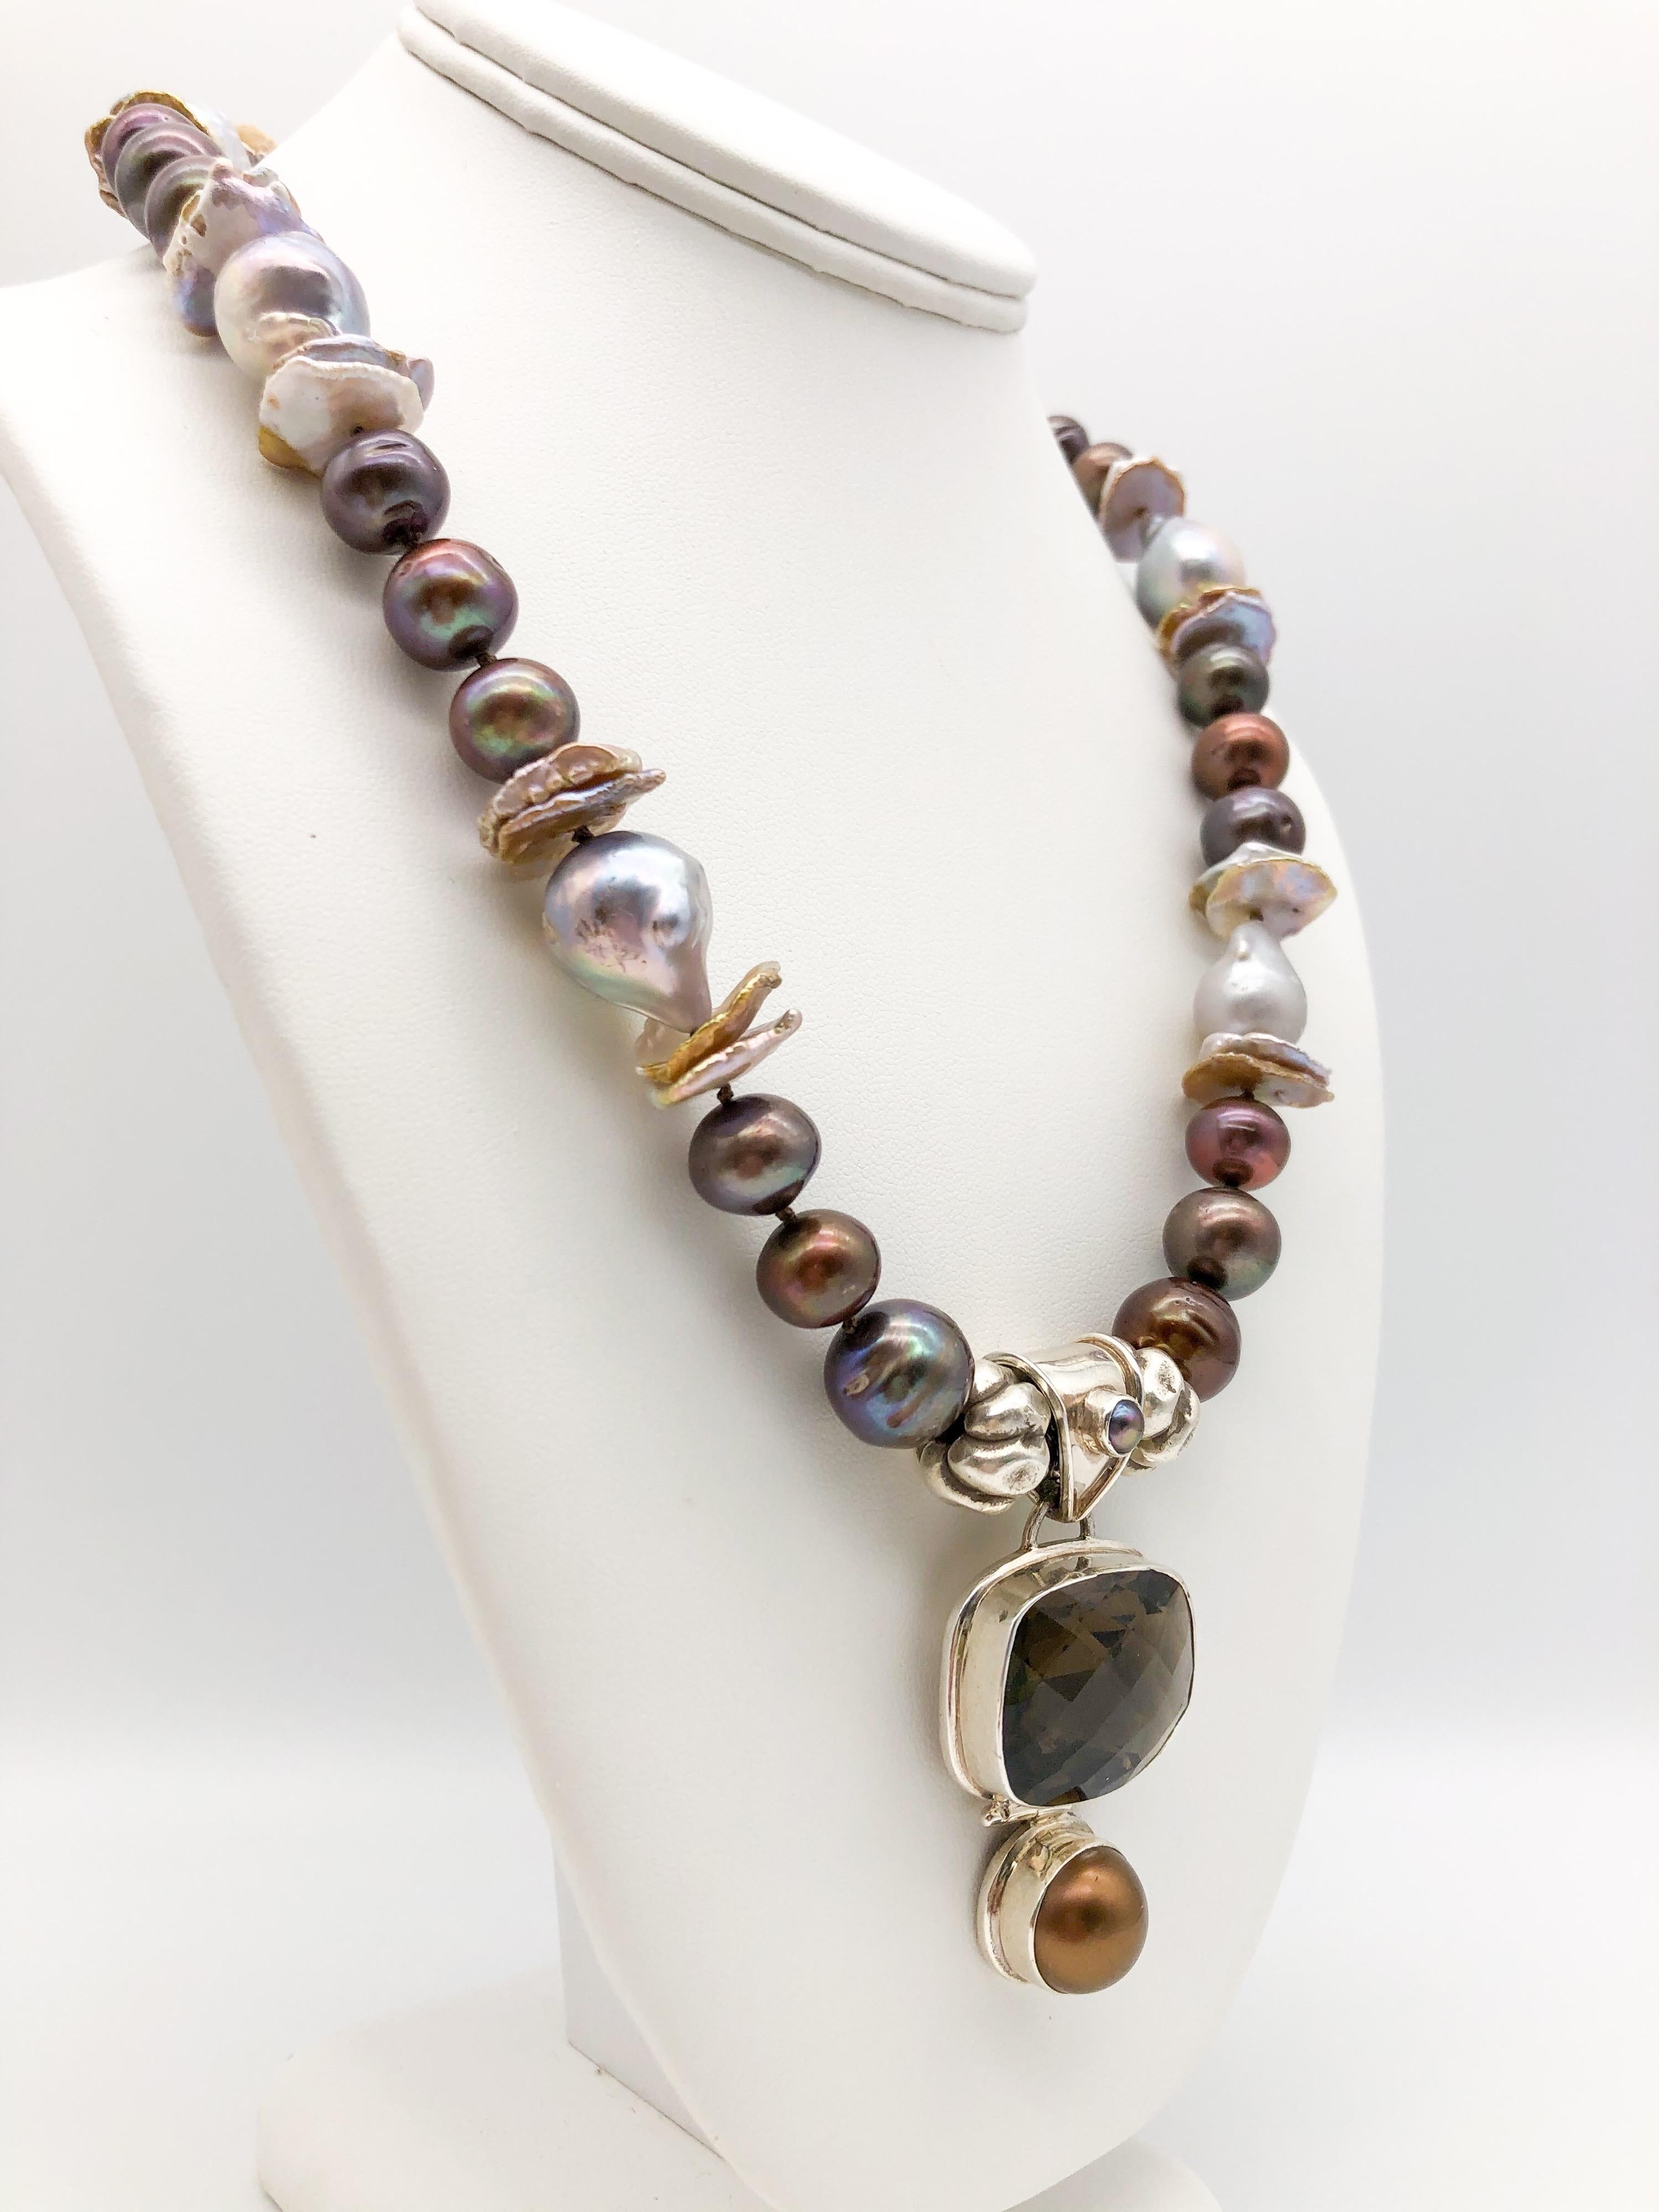 One-of-a-Kind

Dusty Smoky Quartz and chocolate pearl pendant hang from a mixed pearl necklace.
Soft silvery shades combine in a necklace of dark gray peals, dove gray baroque pearls and center drilled greige pearls. The necklace holds a pendant of